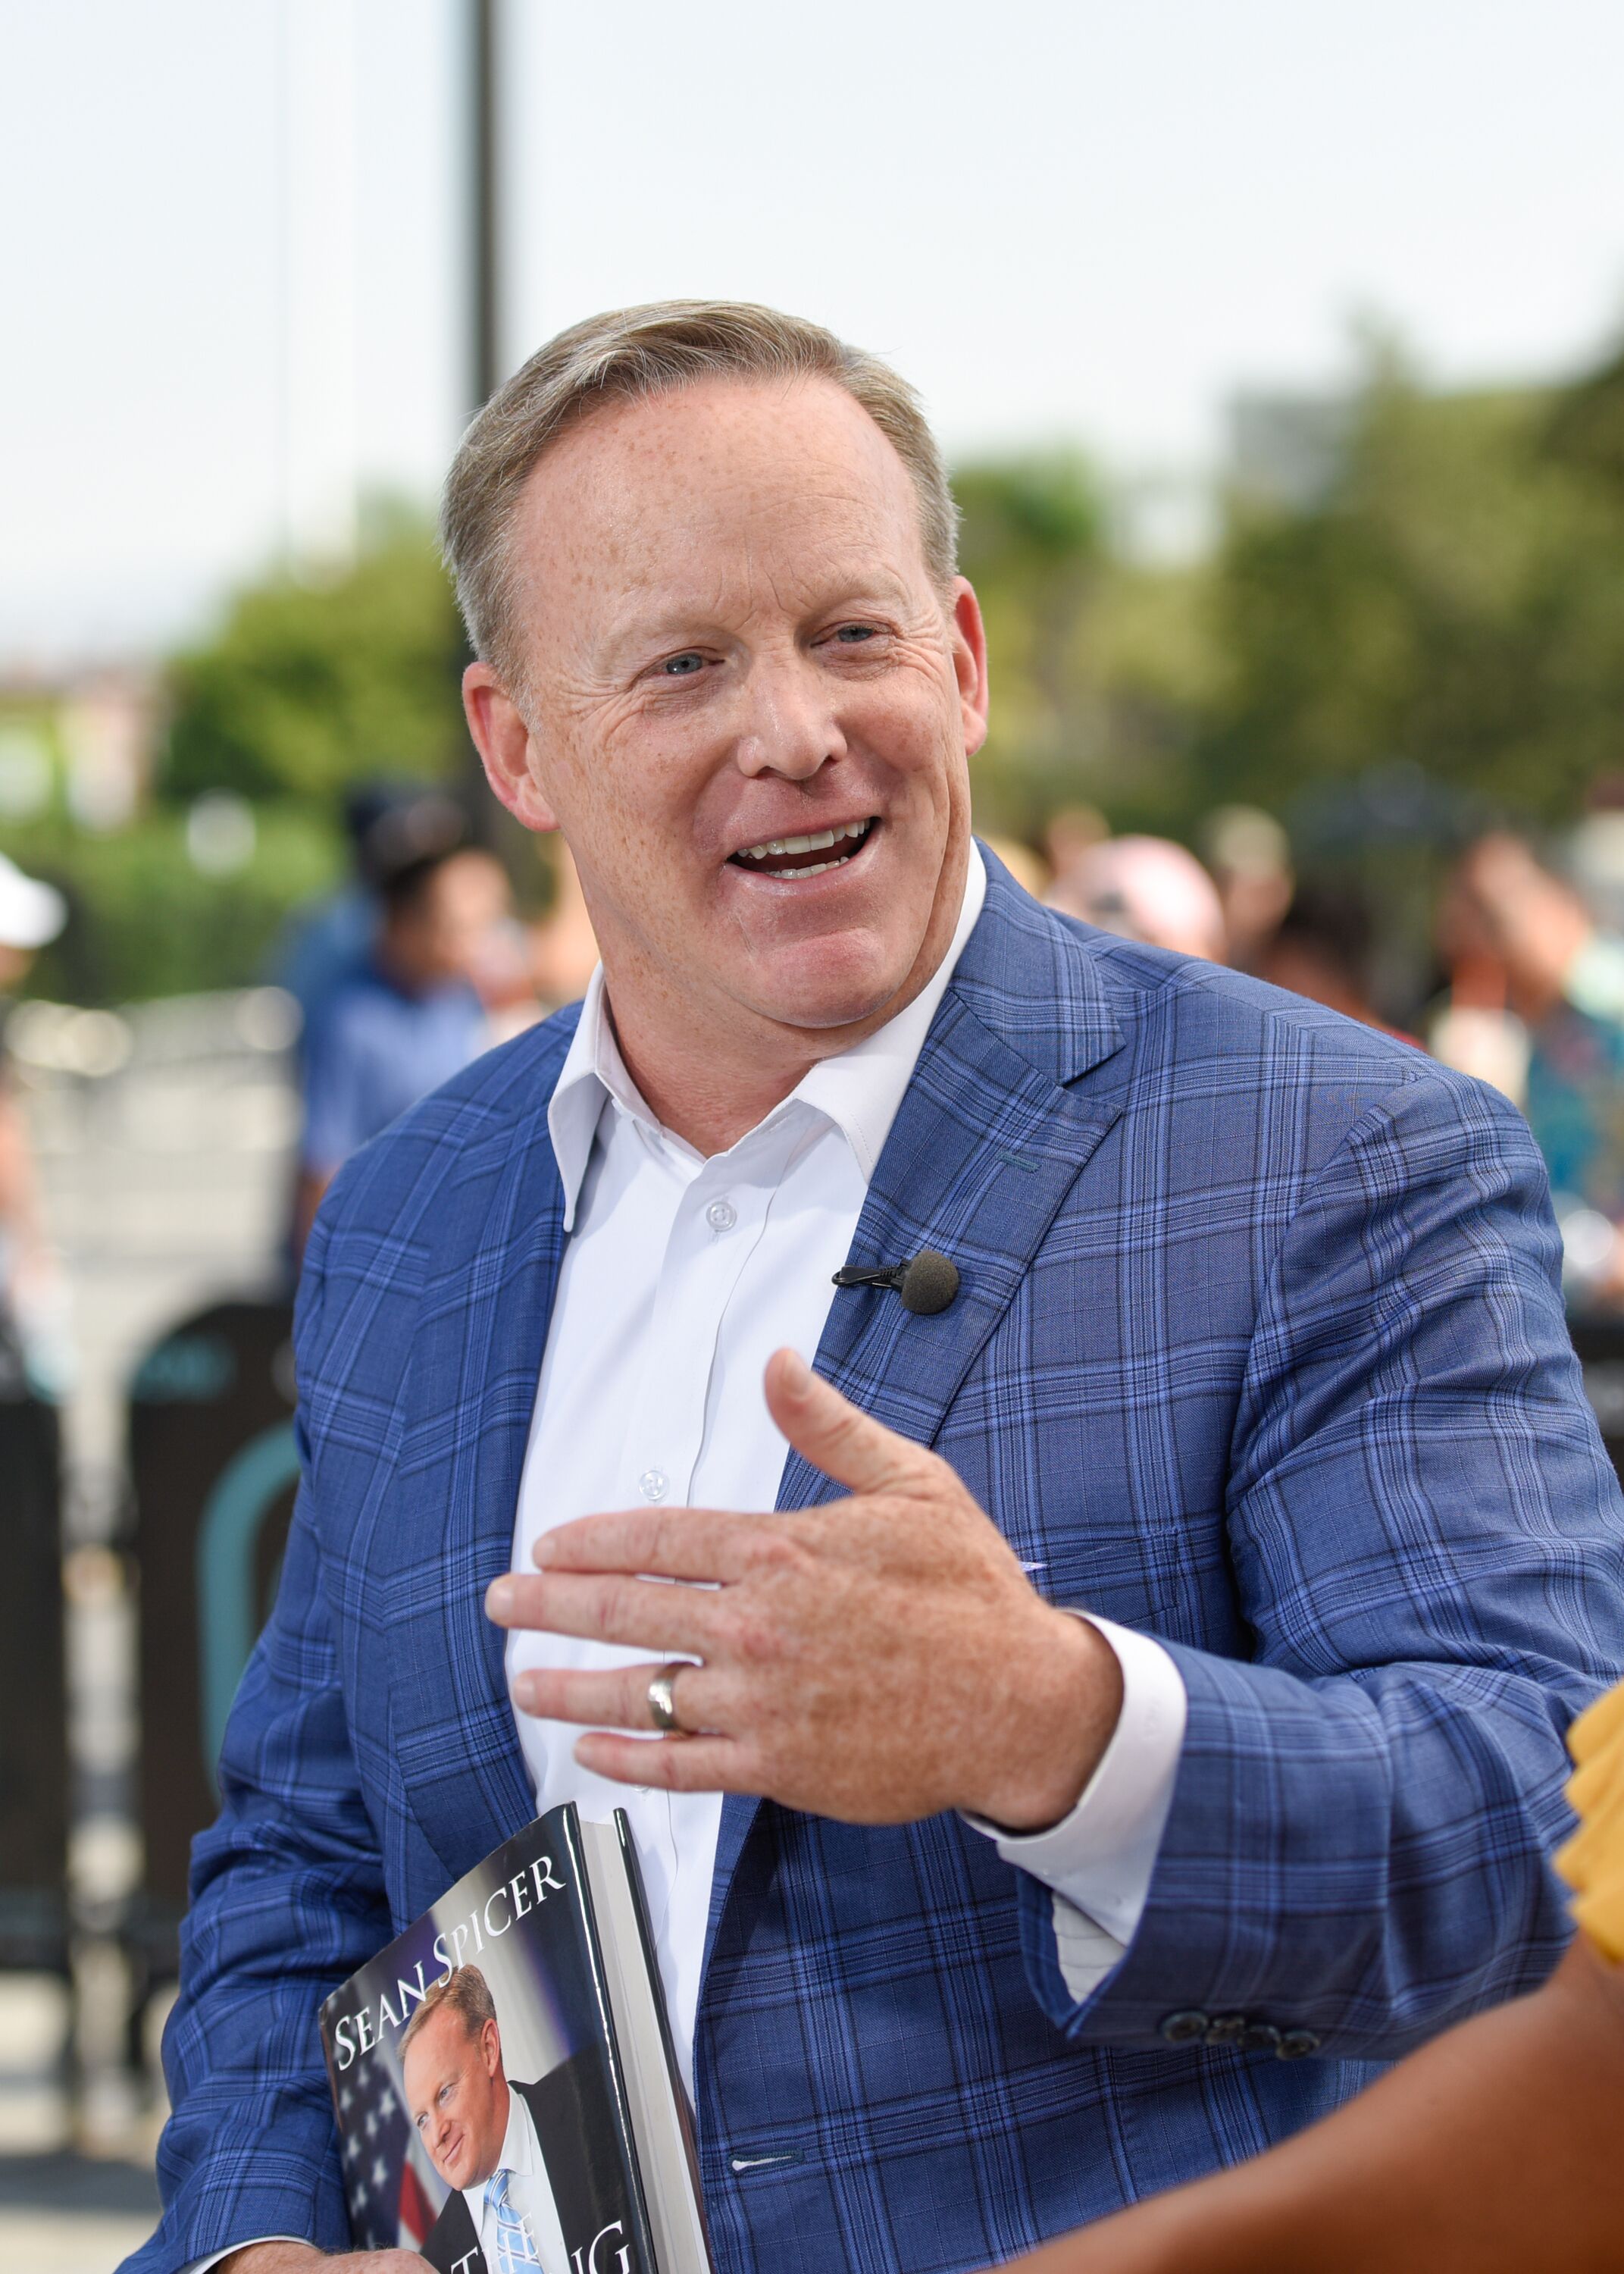  Sean Spicer visits "Extra" at Universal Studios Hollywood on August 1, 2018 in Universal City, California | Photo: Getty Images